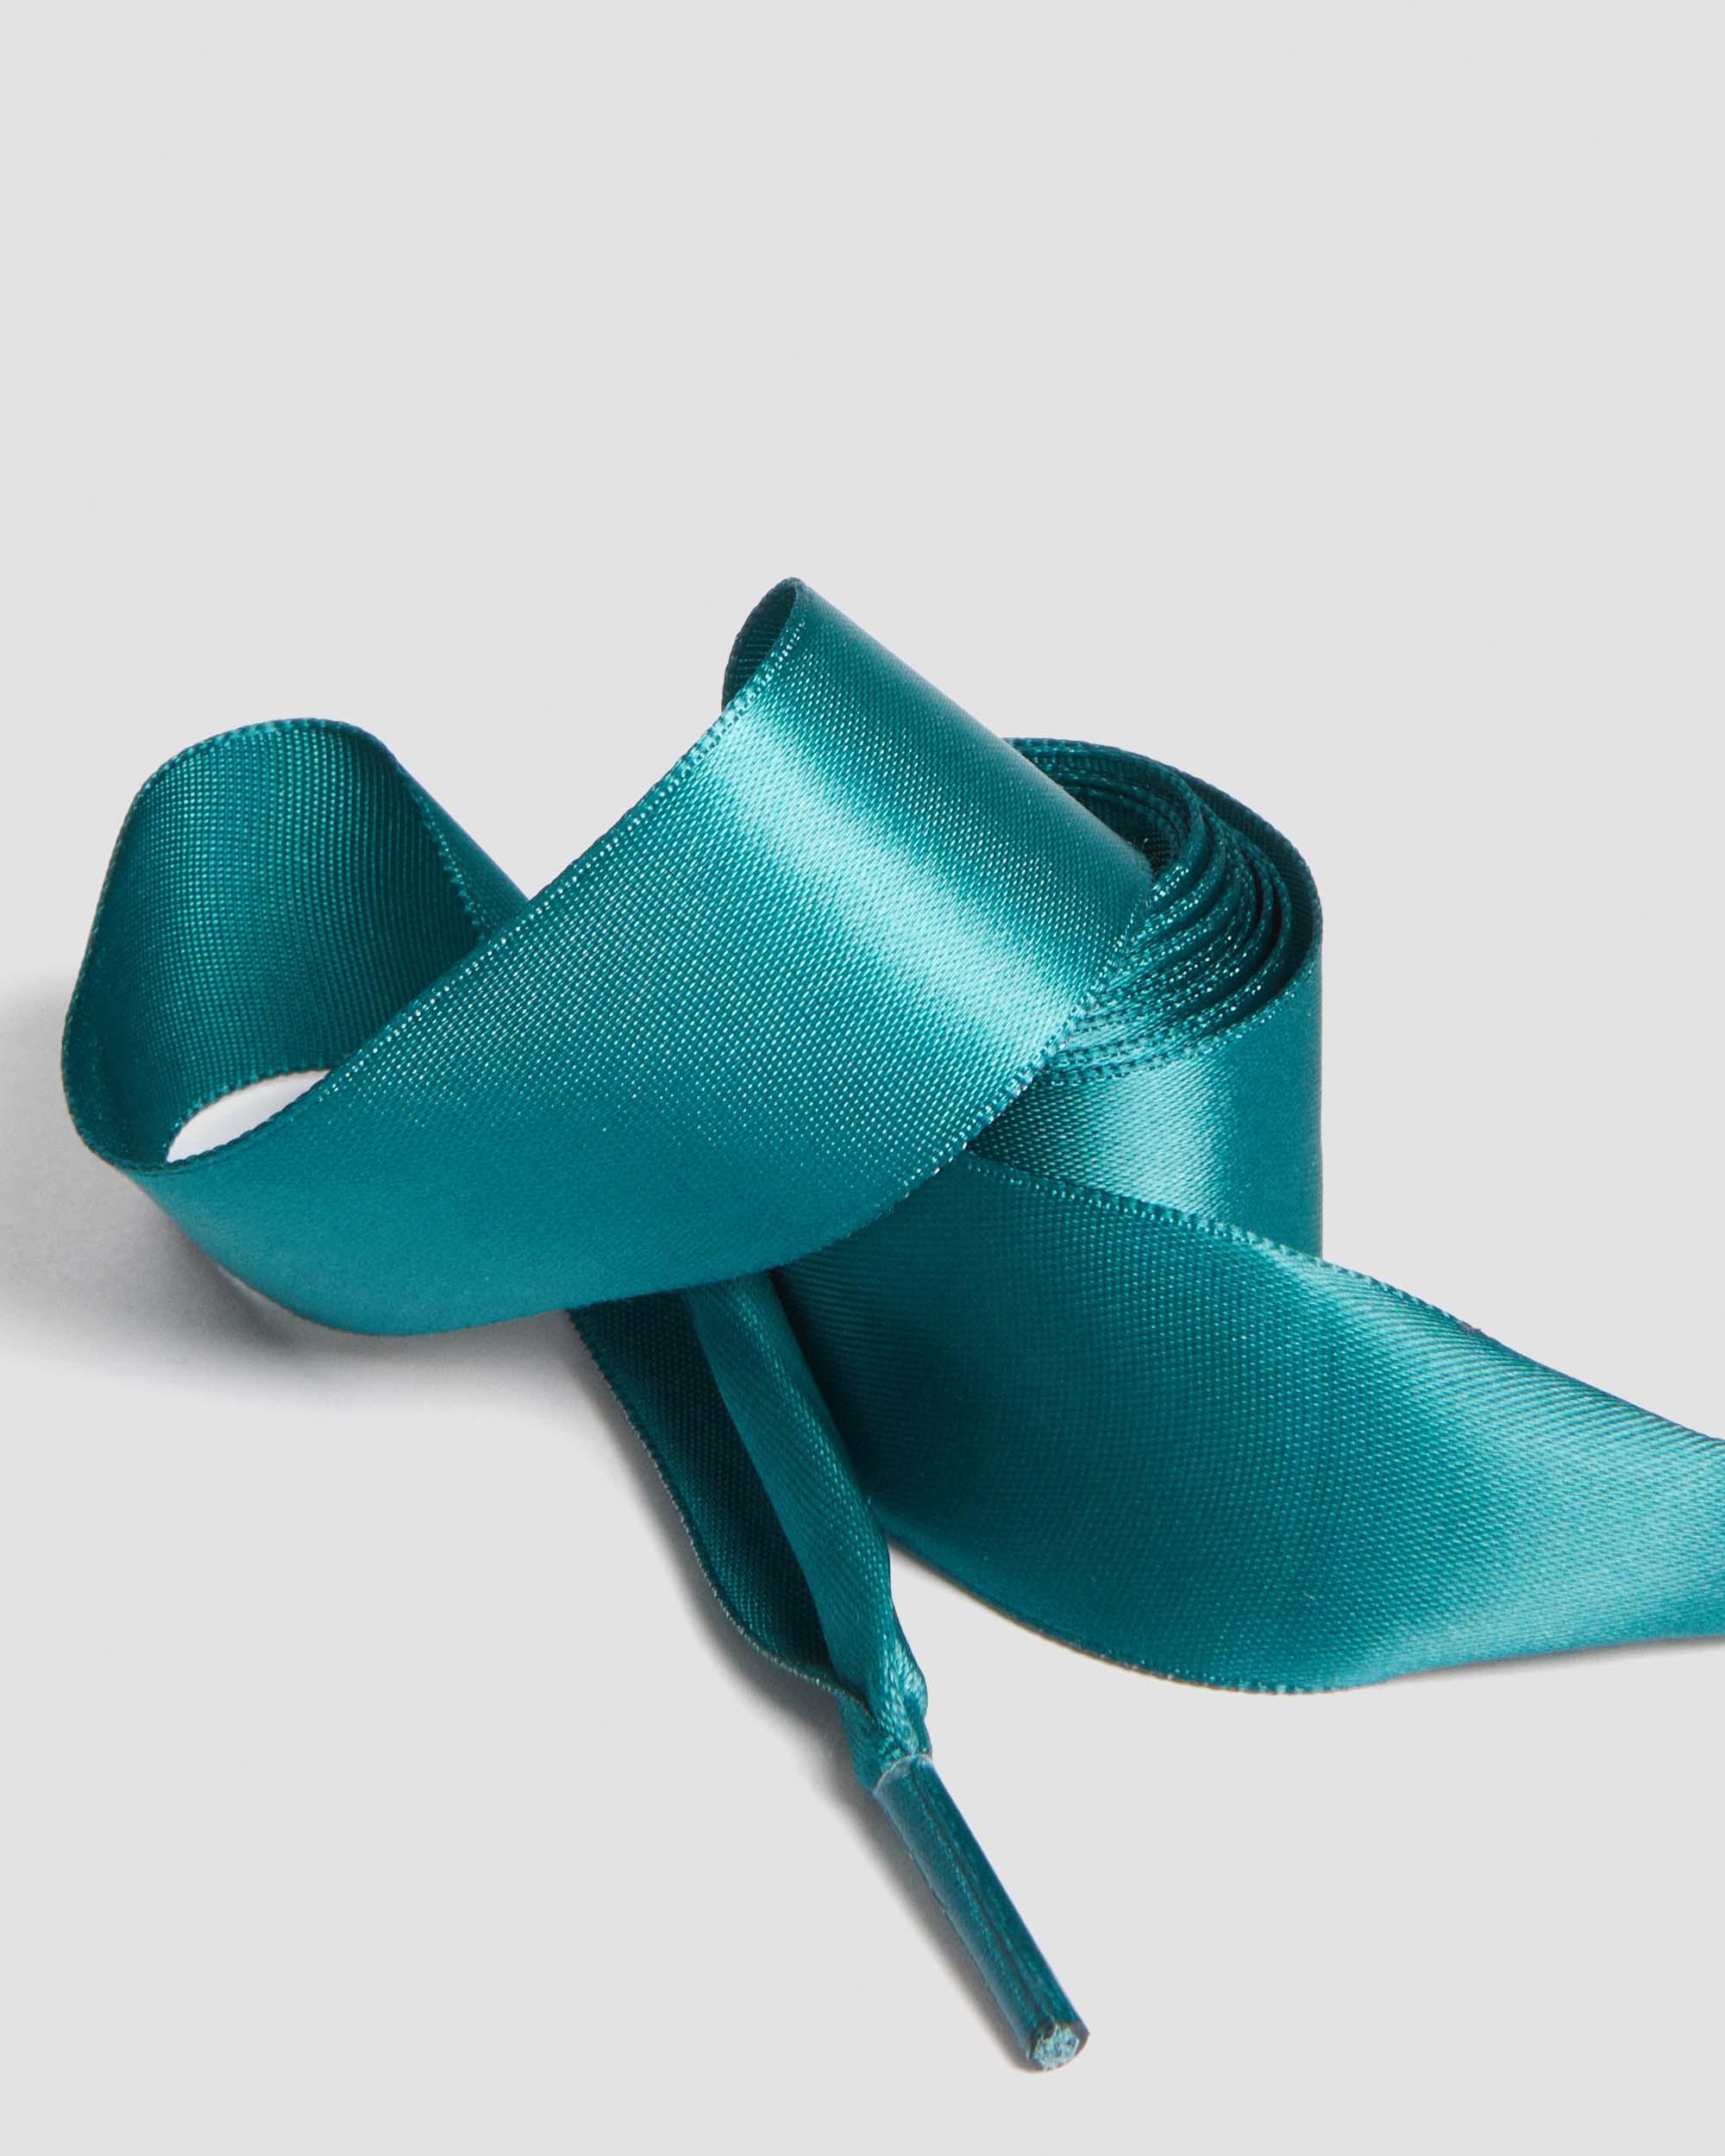 55 inch Ribbon Shoe Laces (8-10 Eye) in TEAL GREEN